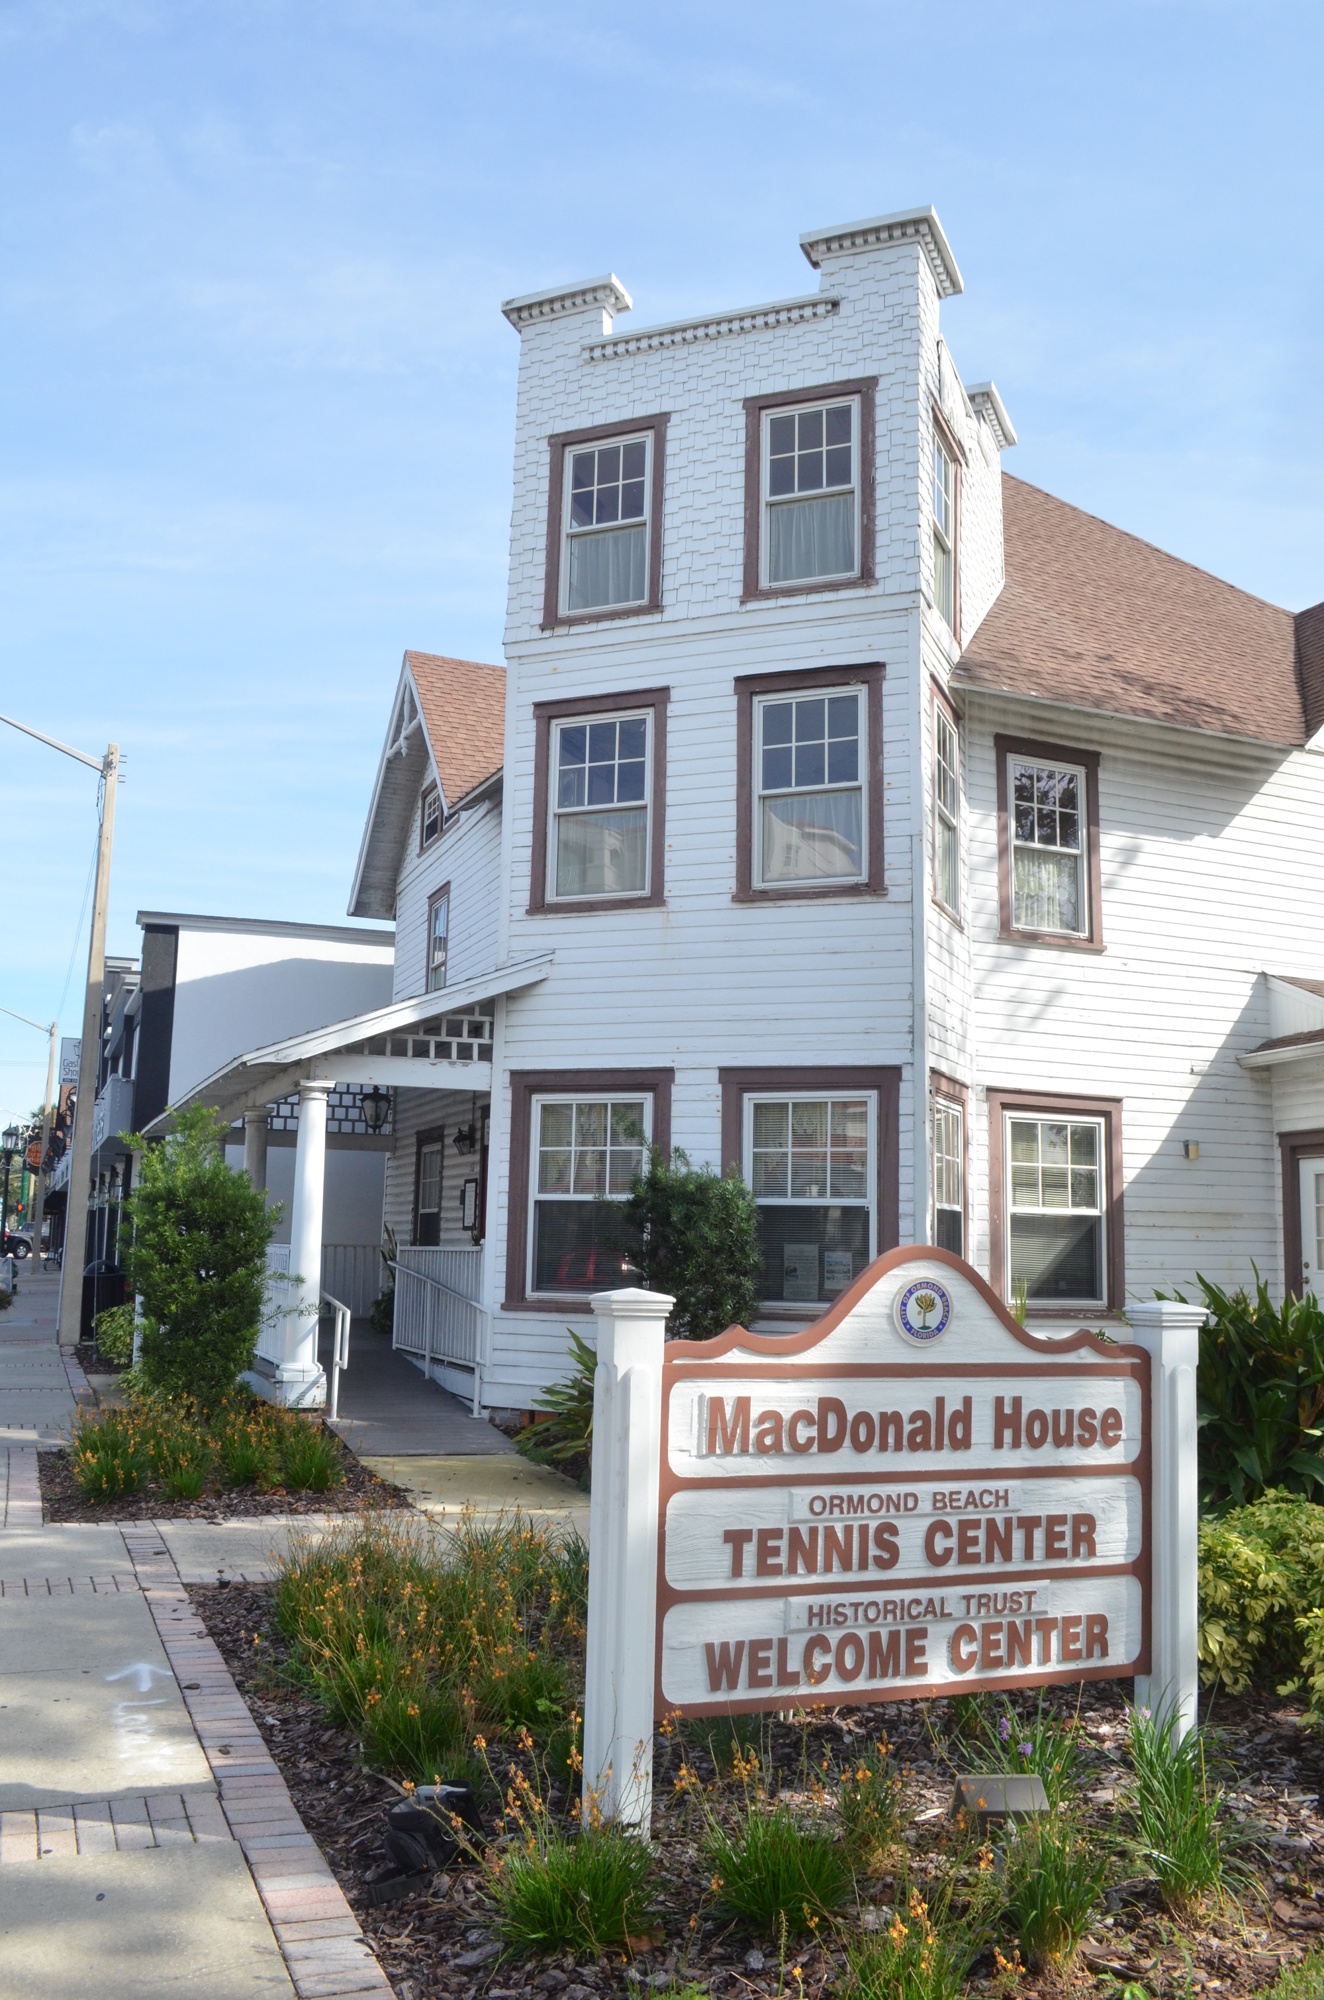 The city plans to develop a historic preservation plan. The MacDonald House, above, currently houses the Ormond Beach Historical Society.